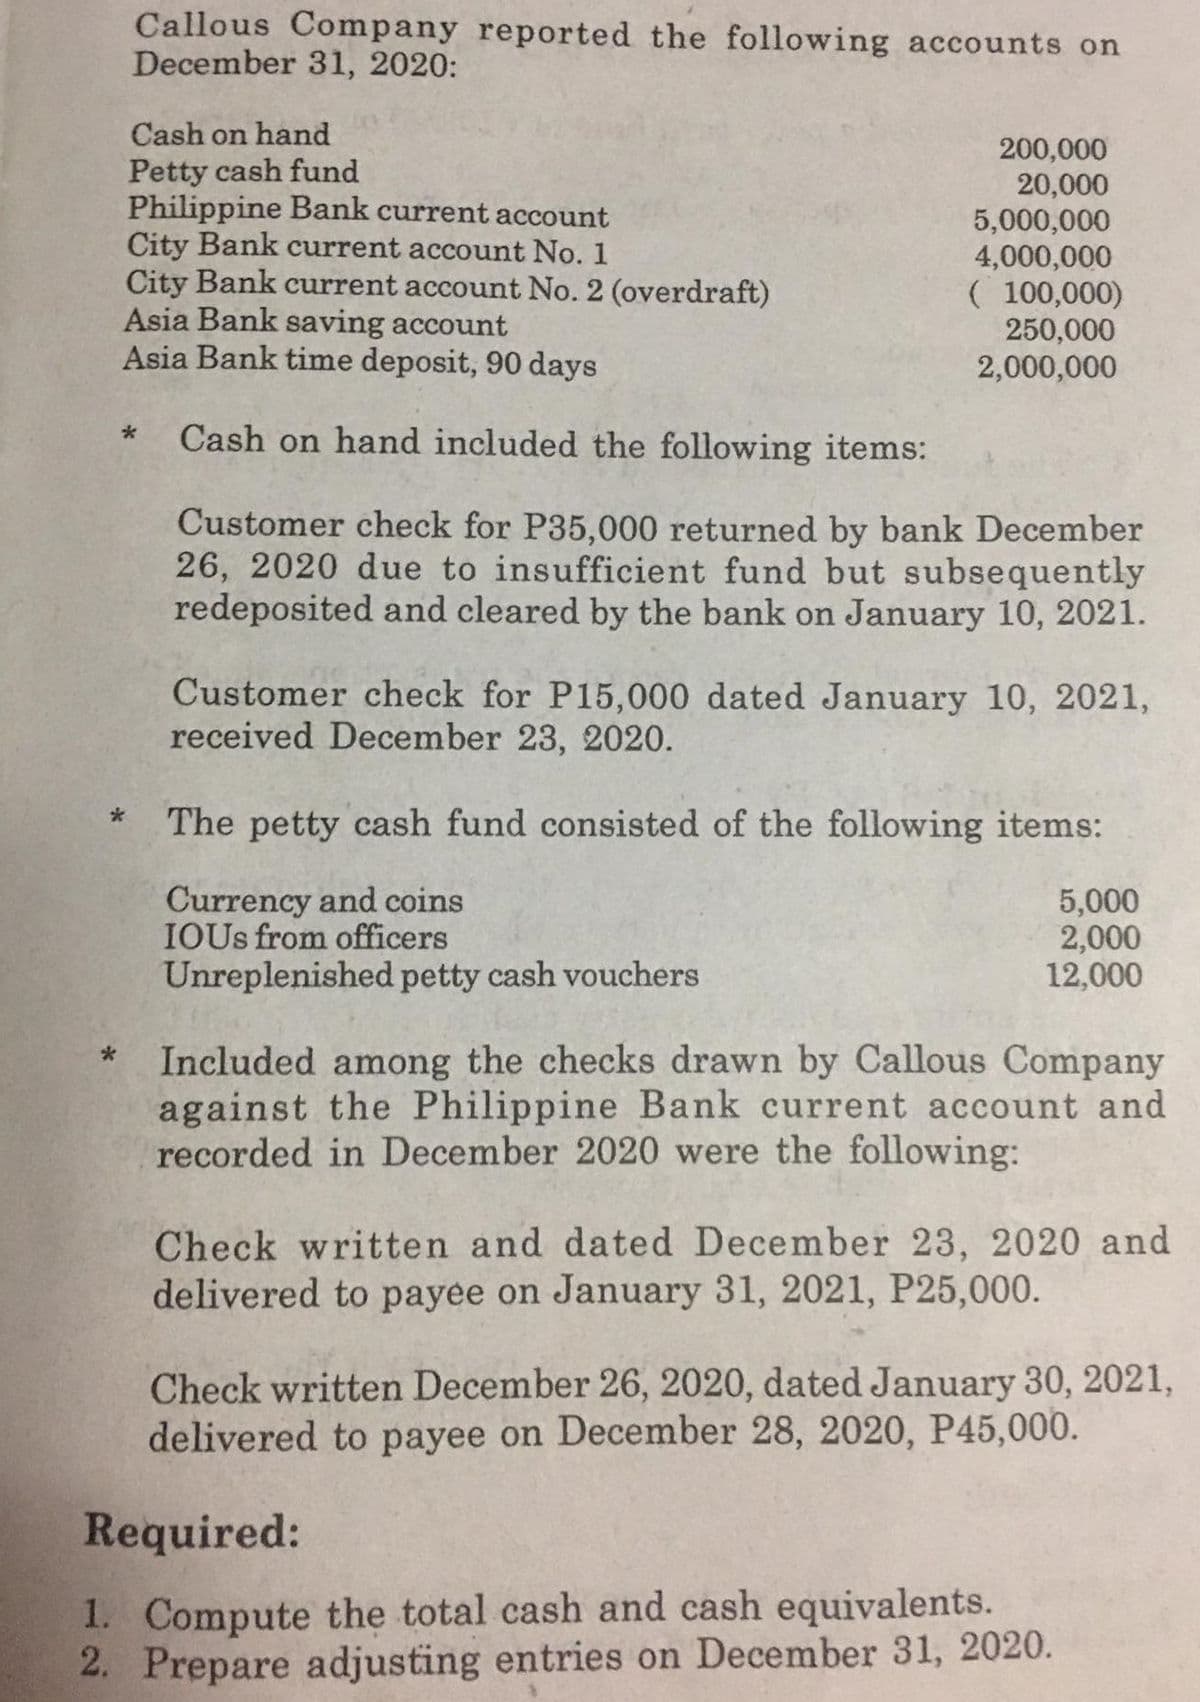 Callous Company reported the following accounts on
December 31, 2020:
Cash on hand
Petty cash fund
Philippine Bank current account
City Bank current account No. 1
City Bank current account No. 2 (overdraft)
Asia Bank saving account
Asia Bank time deposit, 90 days
200,000
20,000
5,000,000
4,000,000
( 100,000)
250,000
2,000,000
Cash on hand included the following items:
Customer check for P35,000 returned by bank December
26, 2020 due to insufficient fund but subsequently
redeposited and cleared by the bank on January 10, 2021.
Customer check for P15,000 dated January 10, 2021,
received December 23, 2020.
The petty cash fund consisted of the following items:
Currency and coins
IOUS from officers
Unreplenished petty cash vouchers
5,000
2,000
12,000
Included among the checks drawn by Callous Company
against the Philippine Bank current account and
recorded in December 2020 were the following:
Check written and dated December 23, 2020 and
delivered to payee on January 31, 2021, P25,000.
Check written December 26, 2020, dated January 30, 2021,
delivered to payee on December 28, 2020, P45,000.
Required:
1. Compute the total cash and cash equivalents.
2. Prepare adjusting entries on December 31, 2020.
